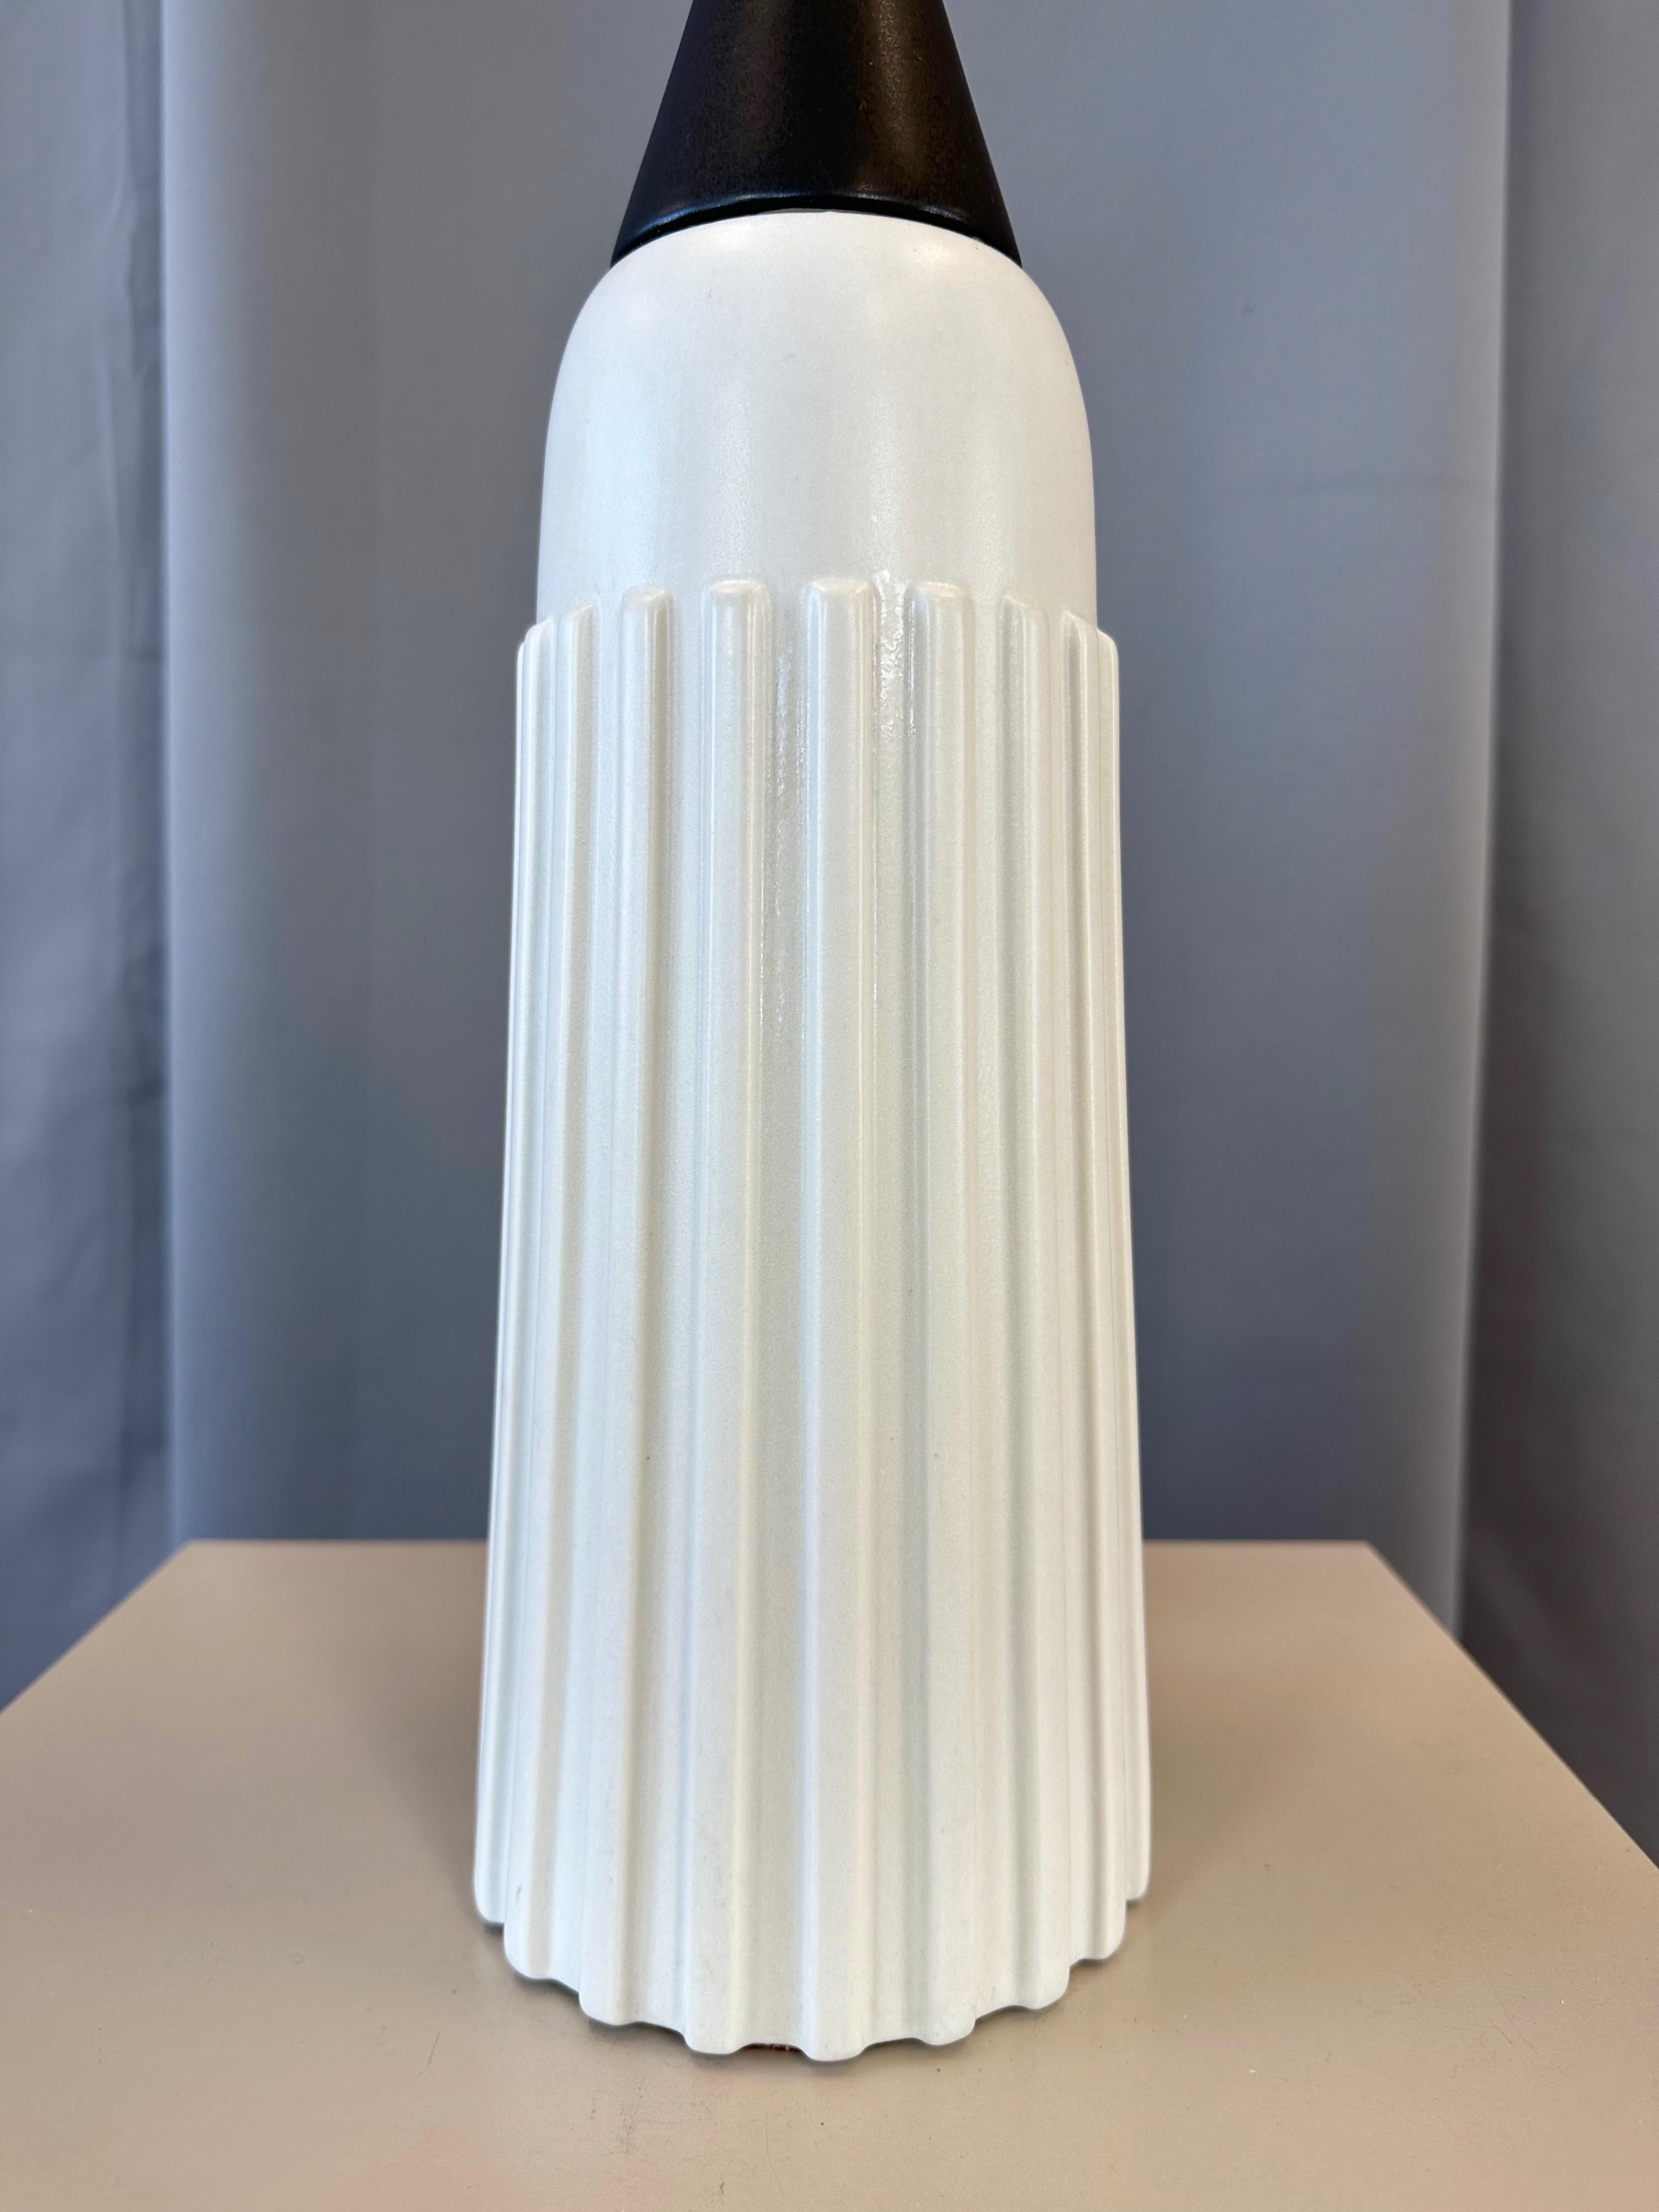 Mid-Century Modern Black & White Ceramic Ribbed Bottle-Shaped Table Lamp, 1950s In Good Condition For Sale In San Francisco, CA